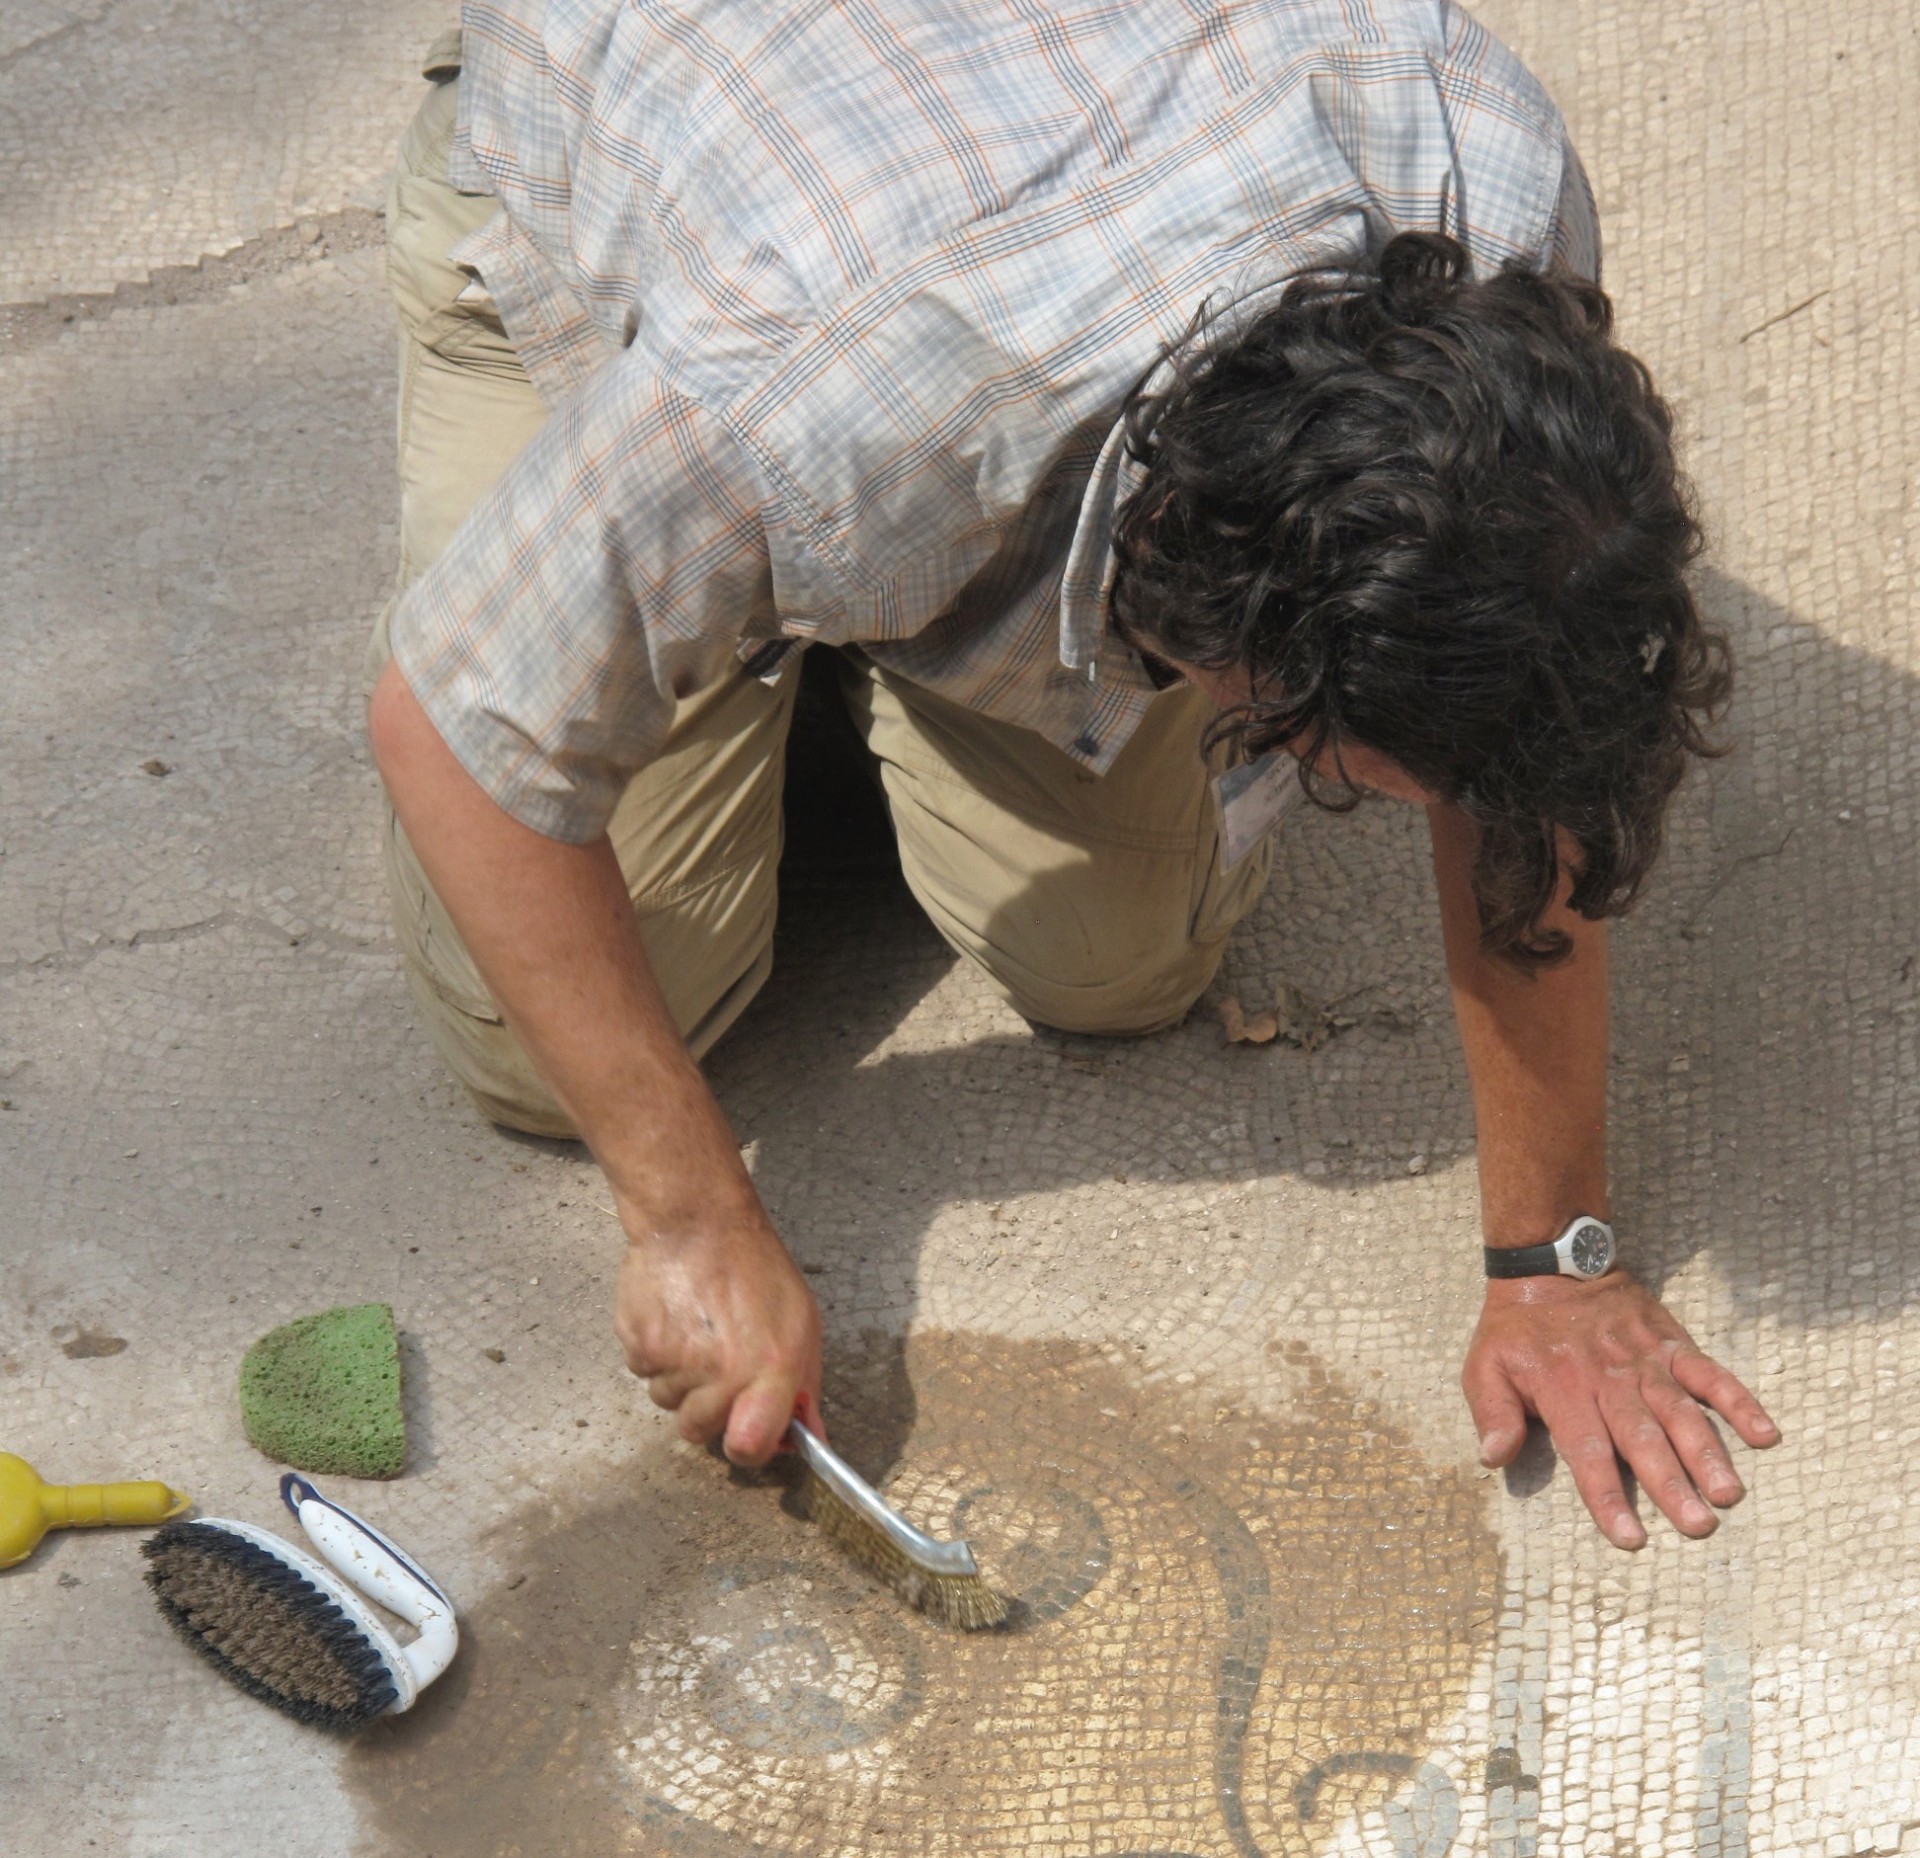 A man washes away dirt from a floor mosaic